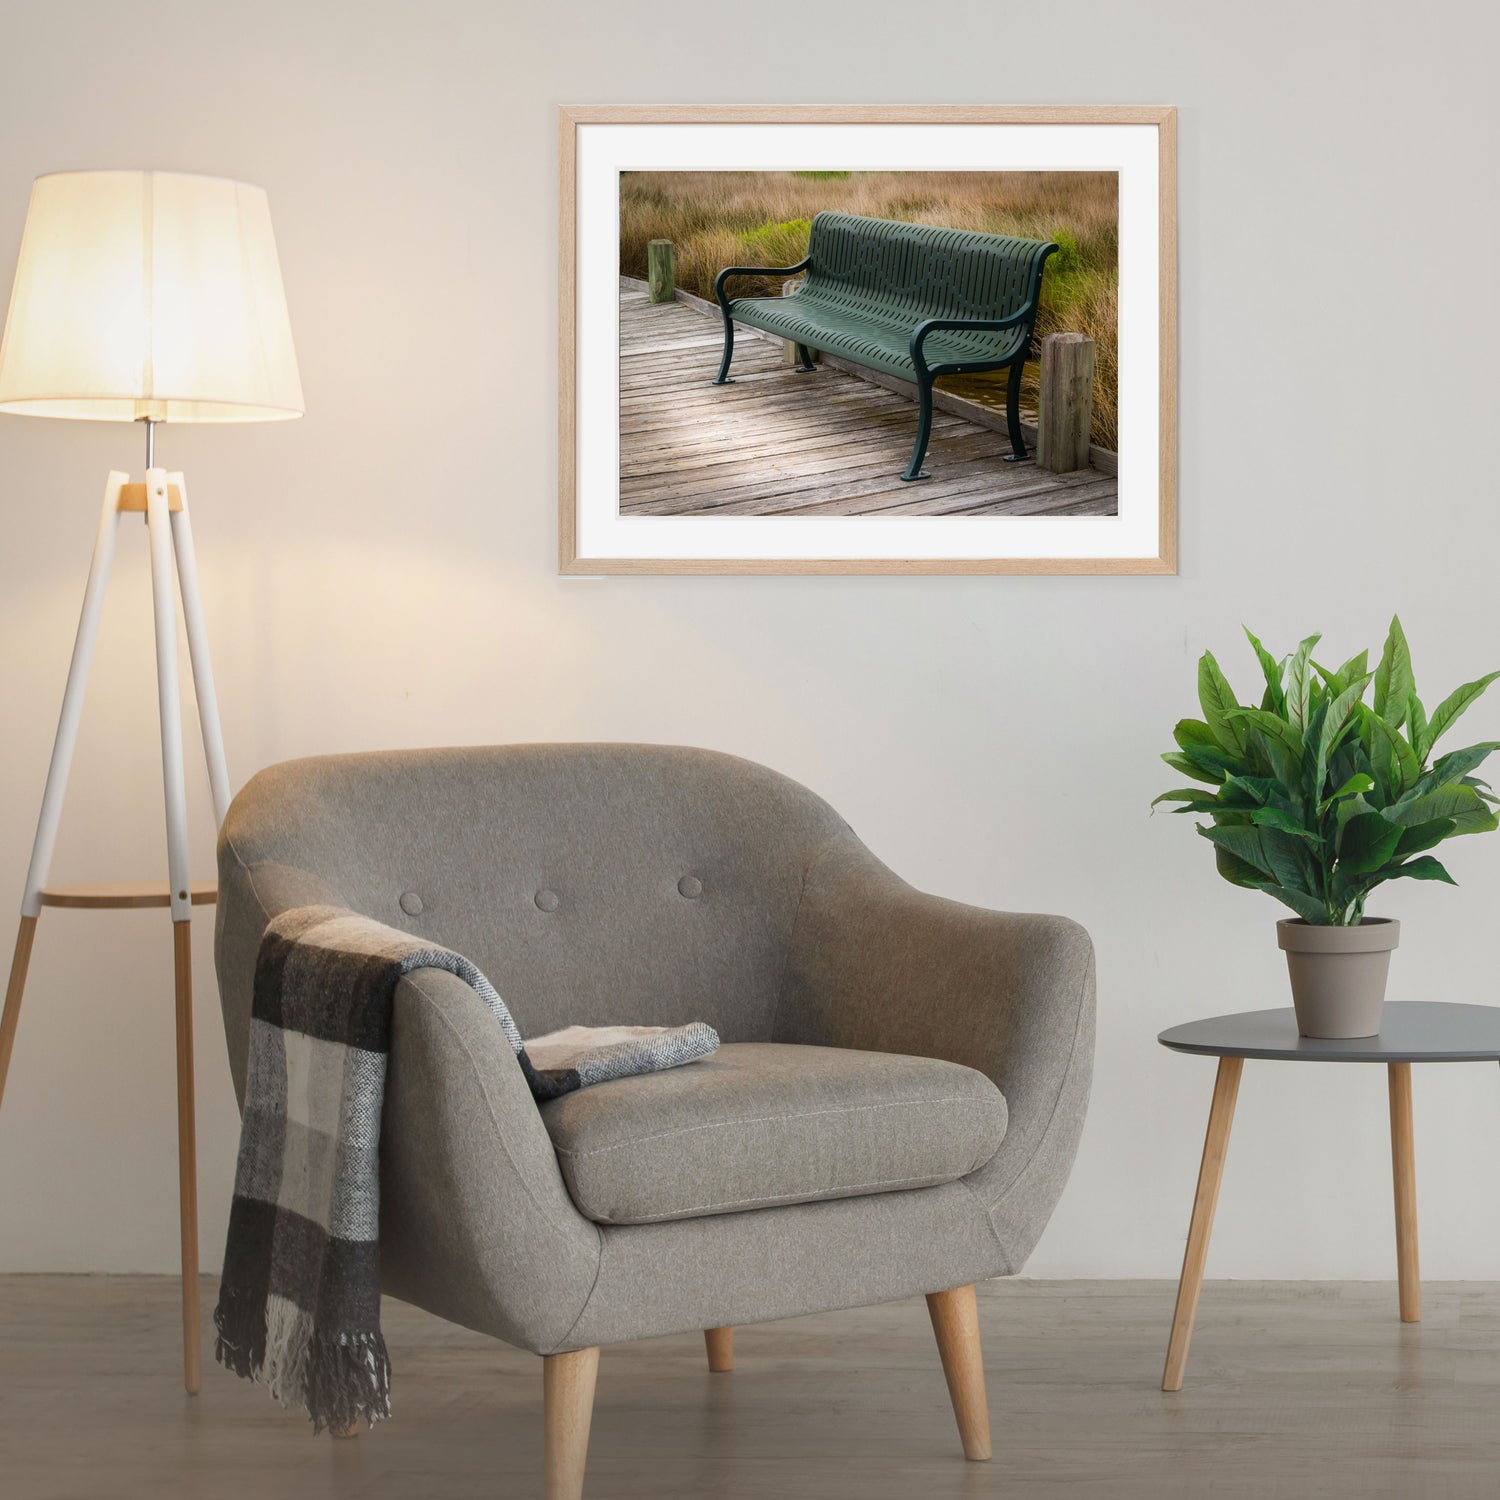 Find Your Perfect Moment of Peace with Our Seaside Bench Coastal Wall Art Print." 